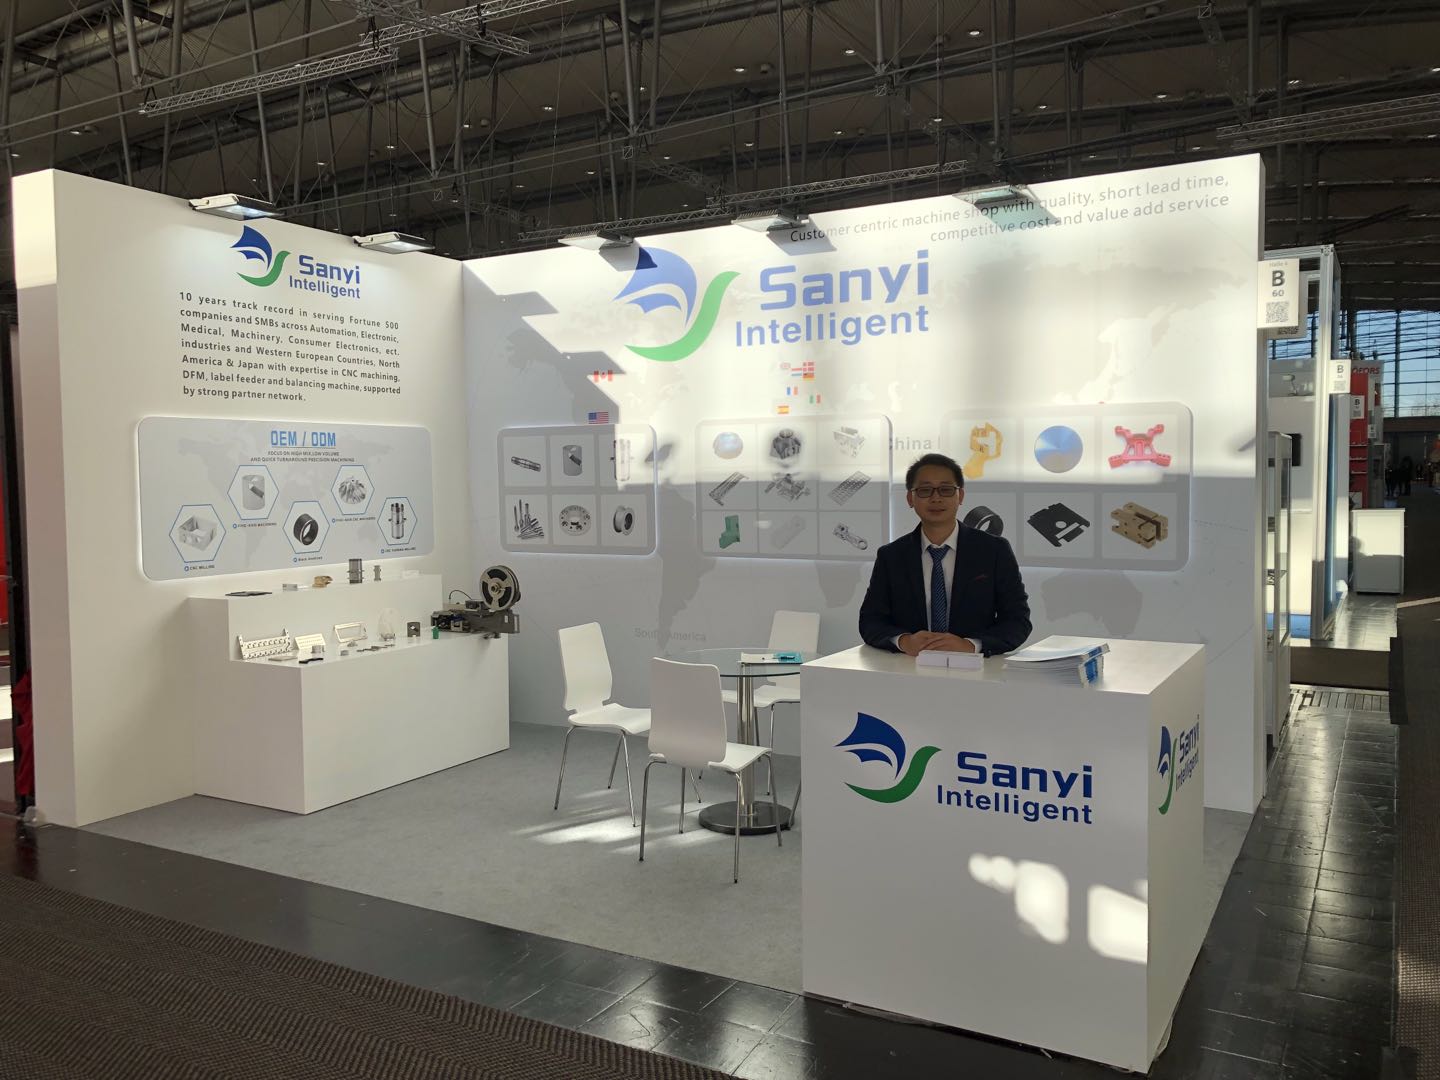 Sanyi successfully attened the 7th Hannover Messe in April, 2019